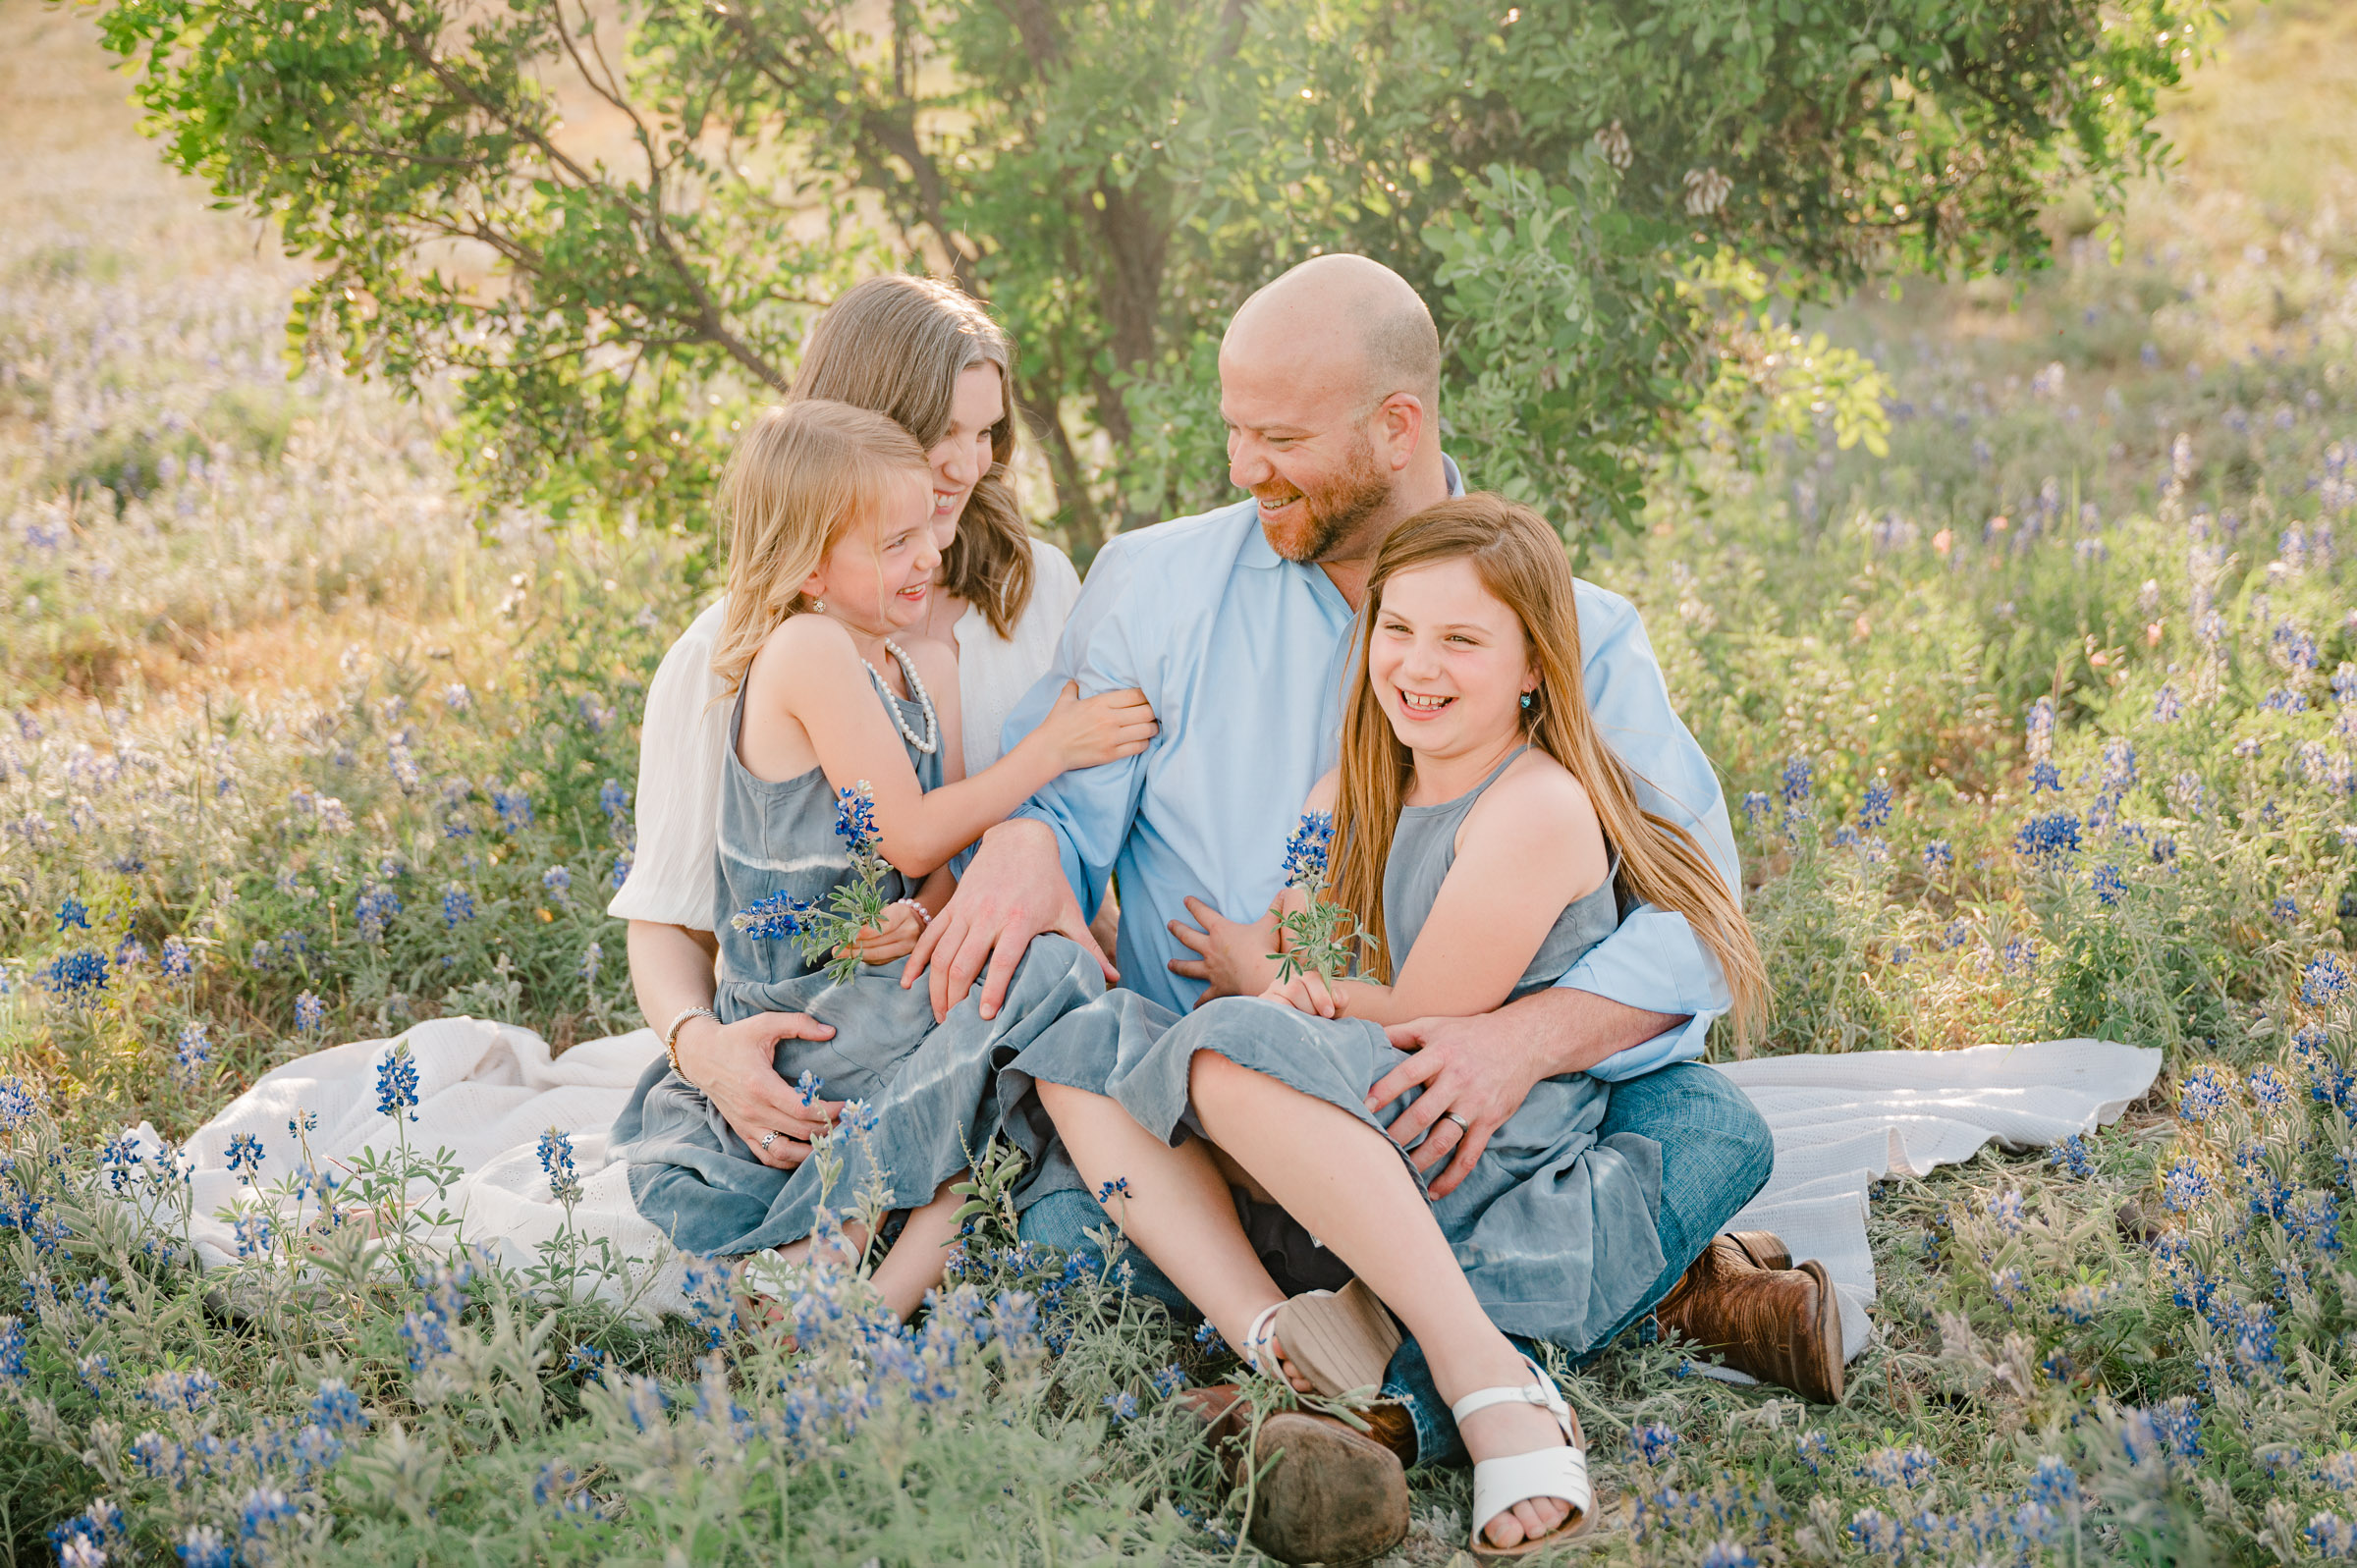 A family plays together on a blanket in a bluebonnet field during family pictures.